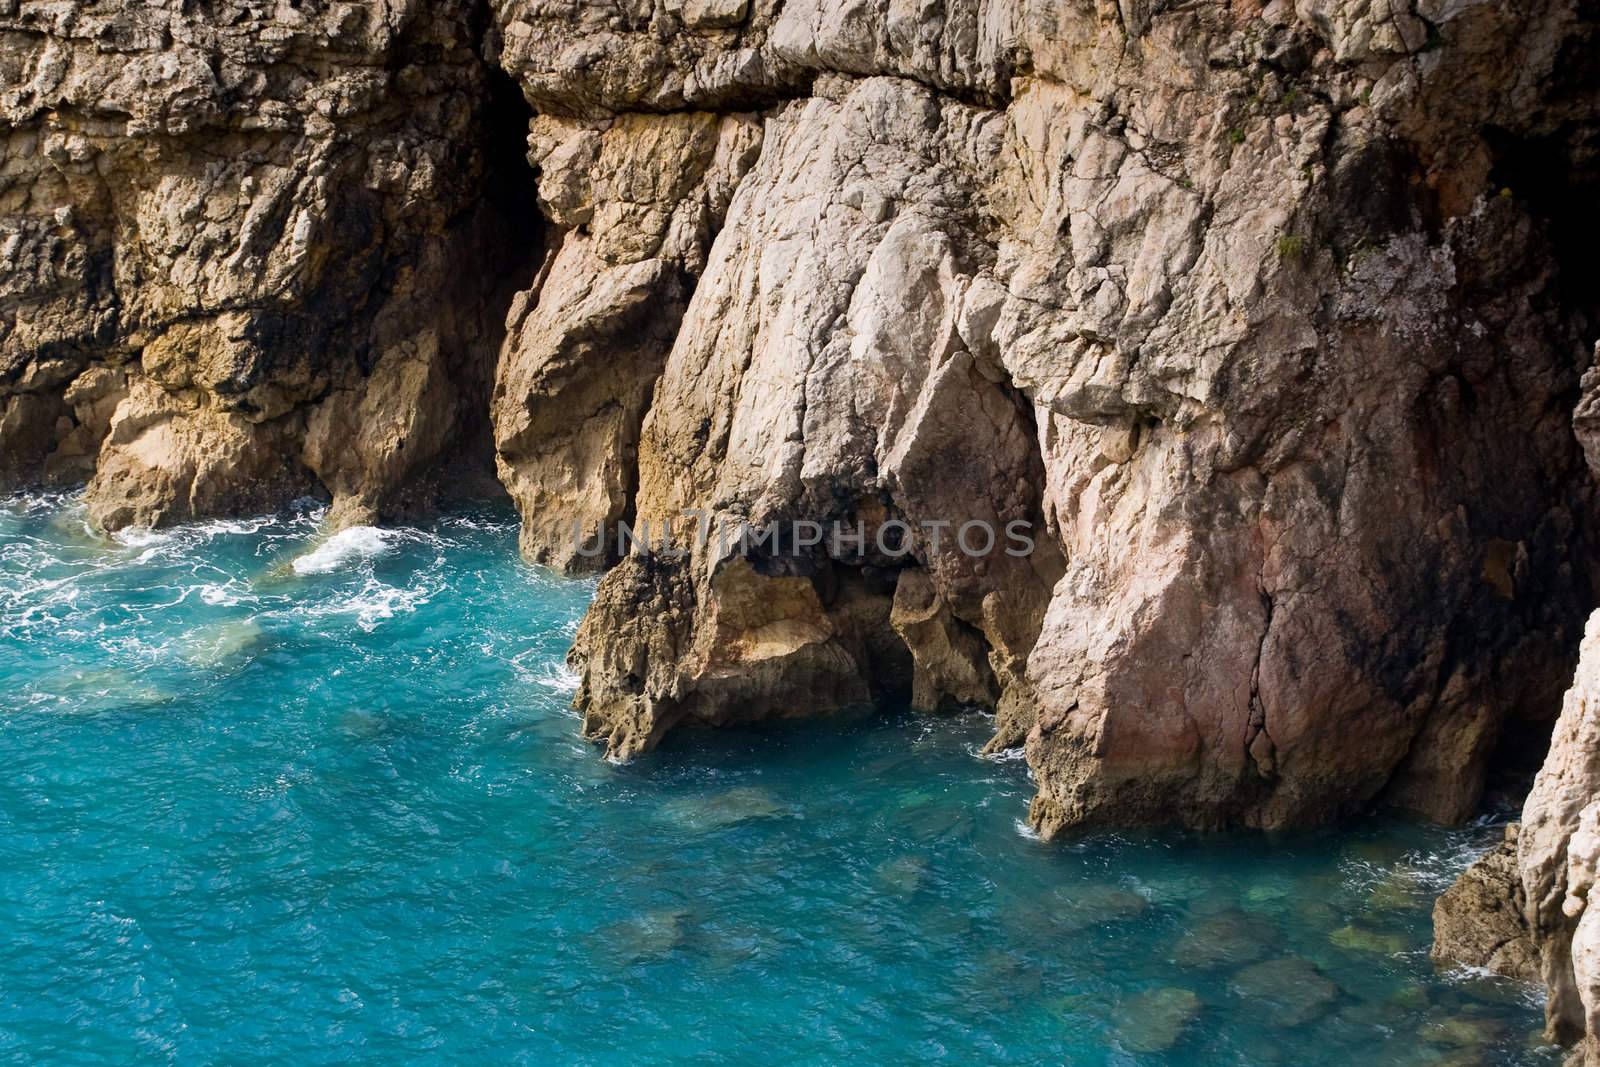 Water at the base of a rocky cliff.  Cape Saint Vincent, Sagres, Portugal